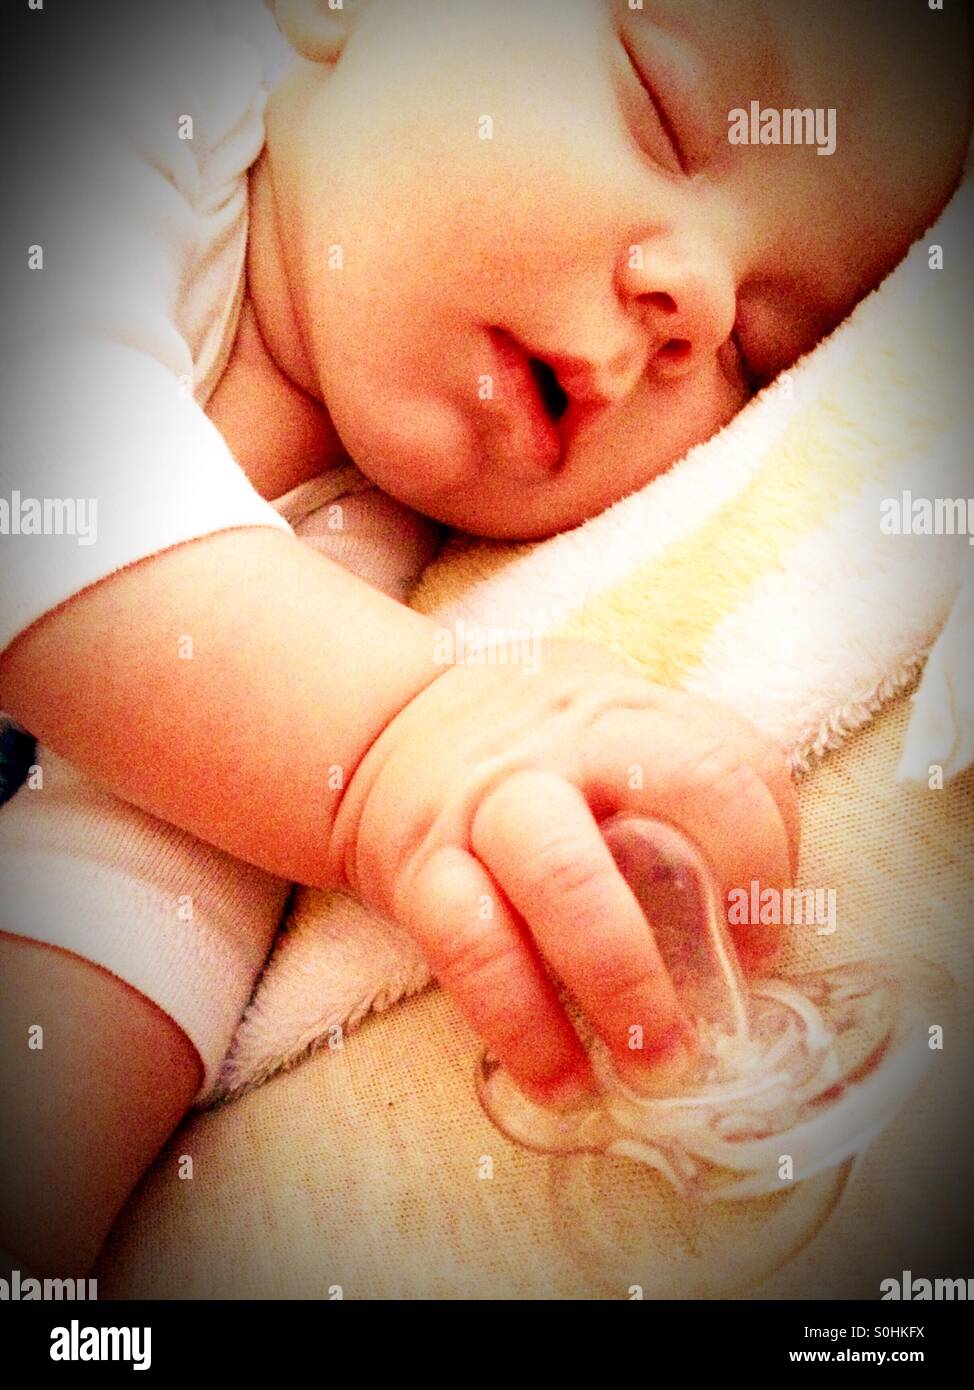 Sleeping baby boy holding his pacifier Stock Photo